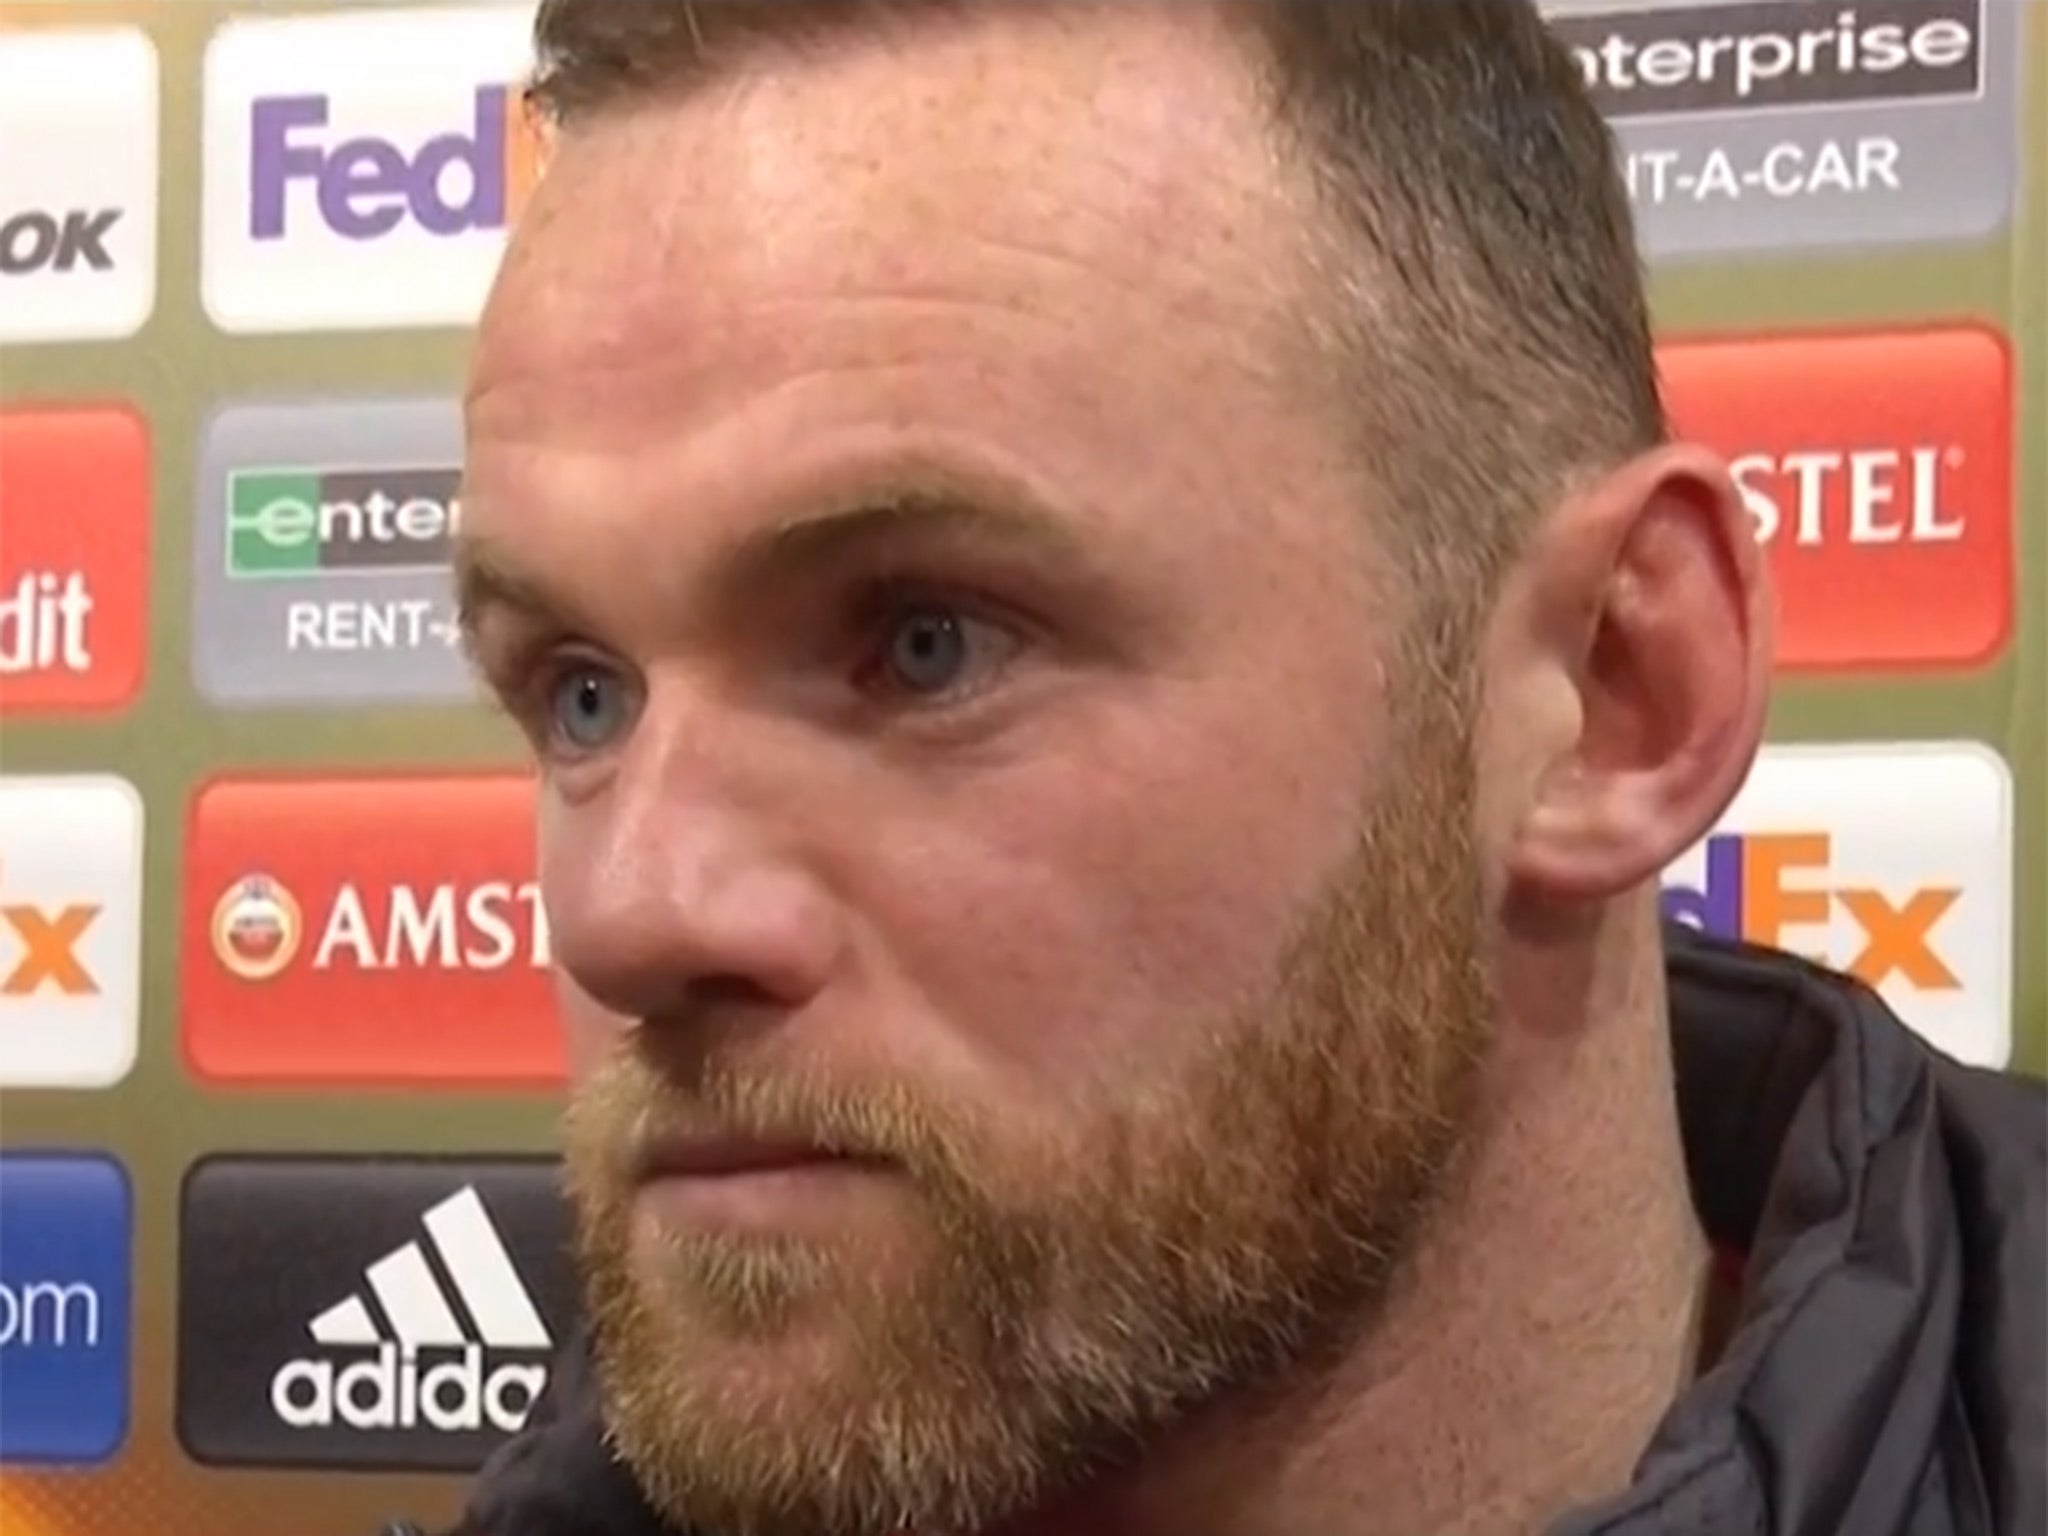 Rooney was noticeably annoyed when a reporter's question referenced the incident